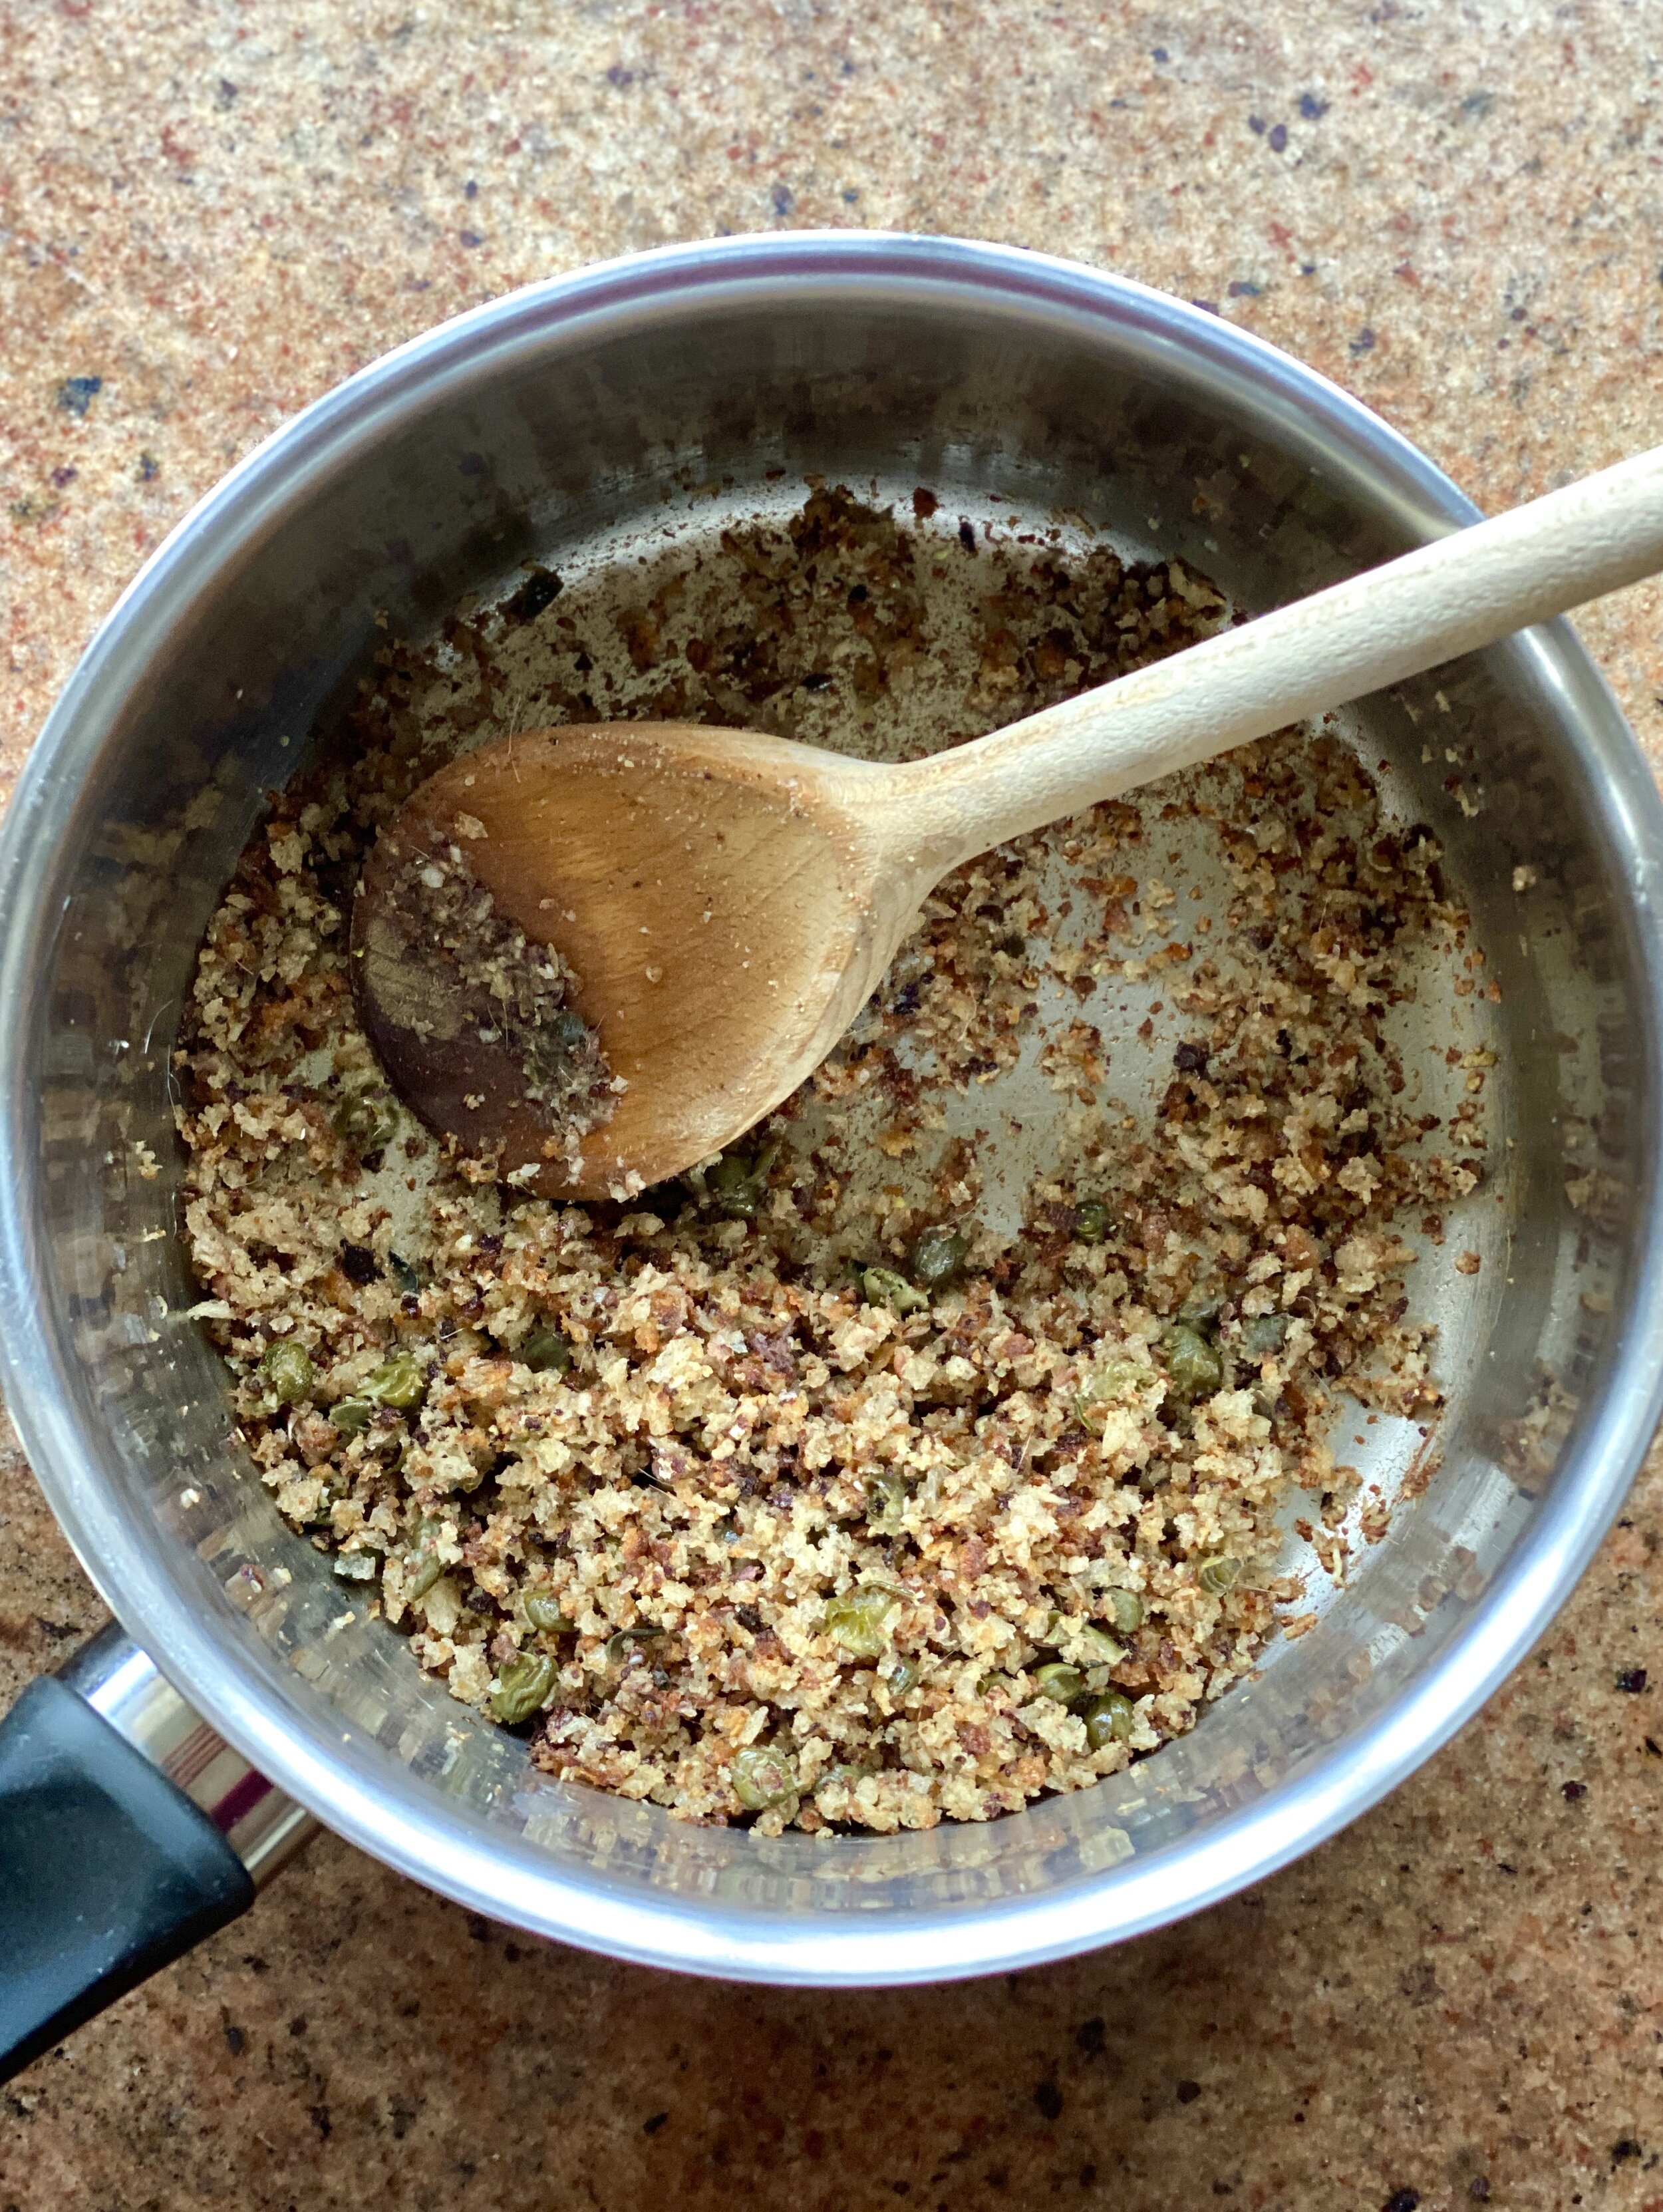 Joey and Katy's golden, crispy anchovy breadcrumbs in a small saucepan